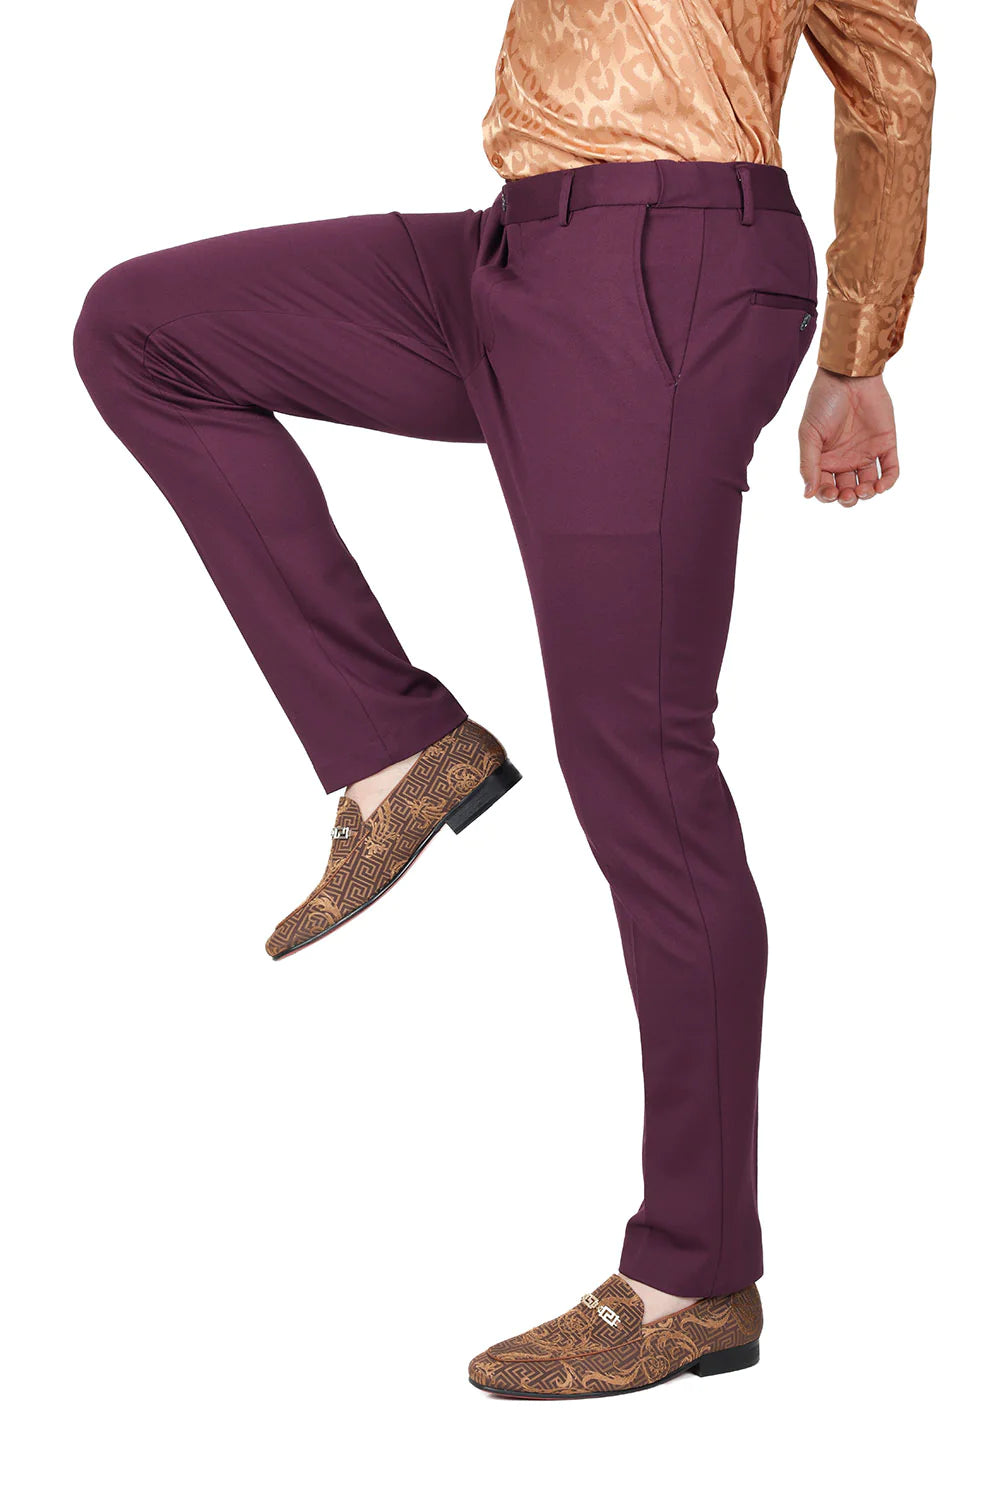 Barabas Men's Solid Color Basic Essential Chino Dress Pants